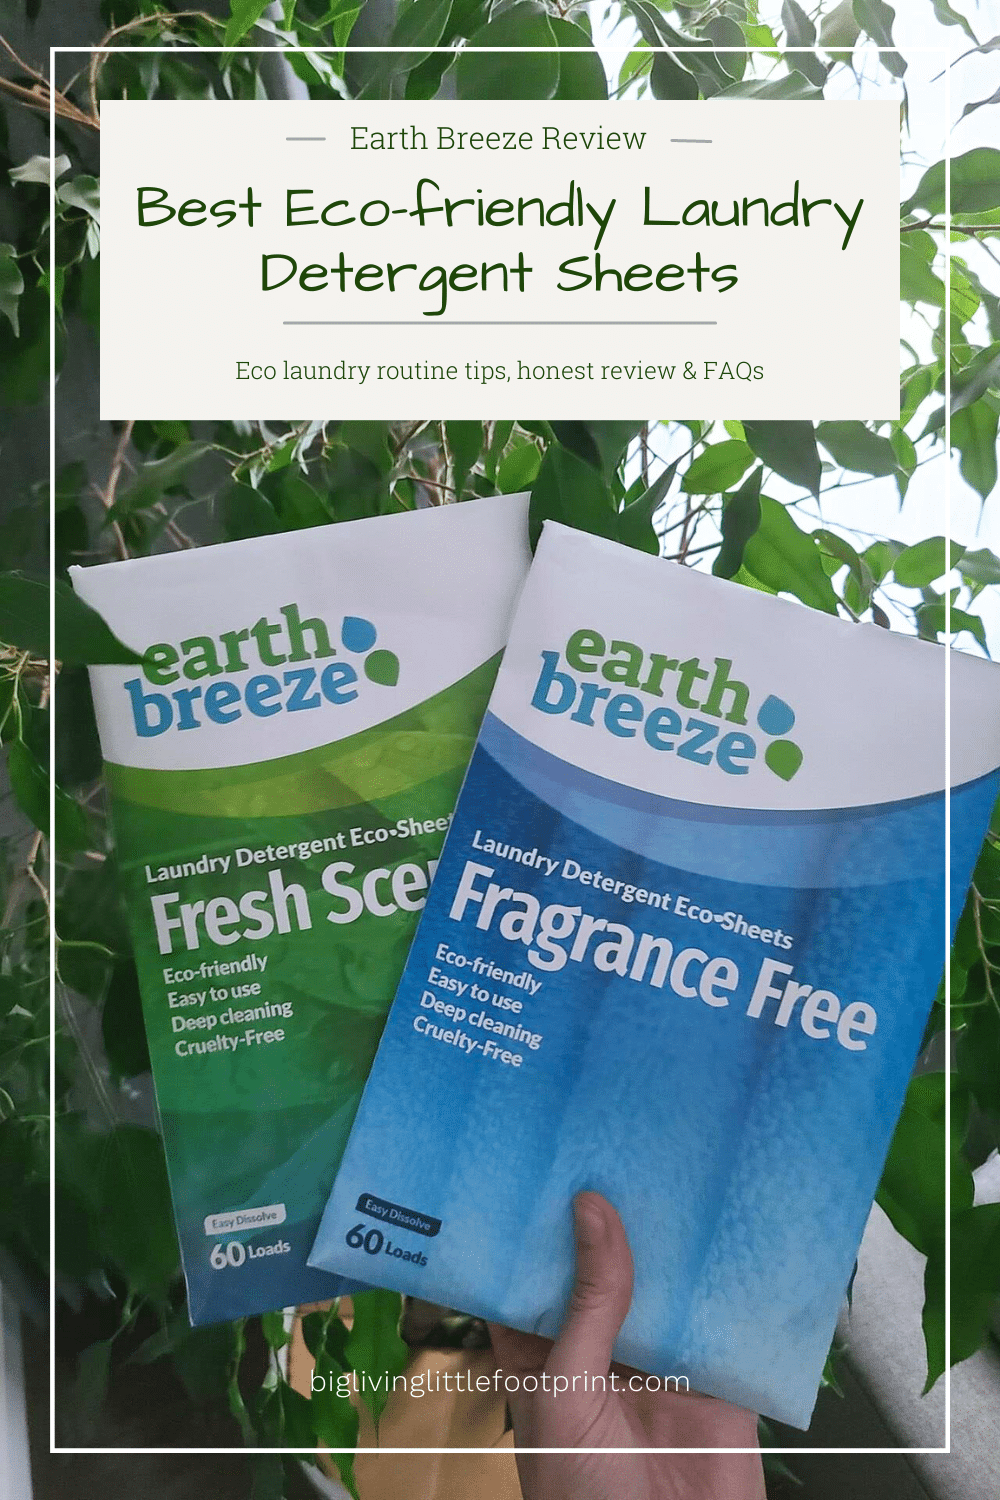 Earth Breeze Laundry Detergent Liquidless 30 Sheets, 60 Loads Fragrance  Free